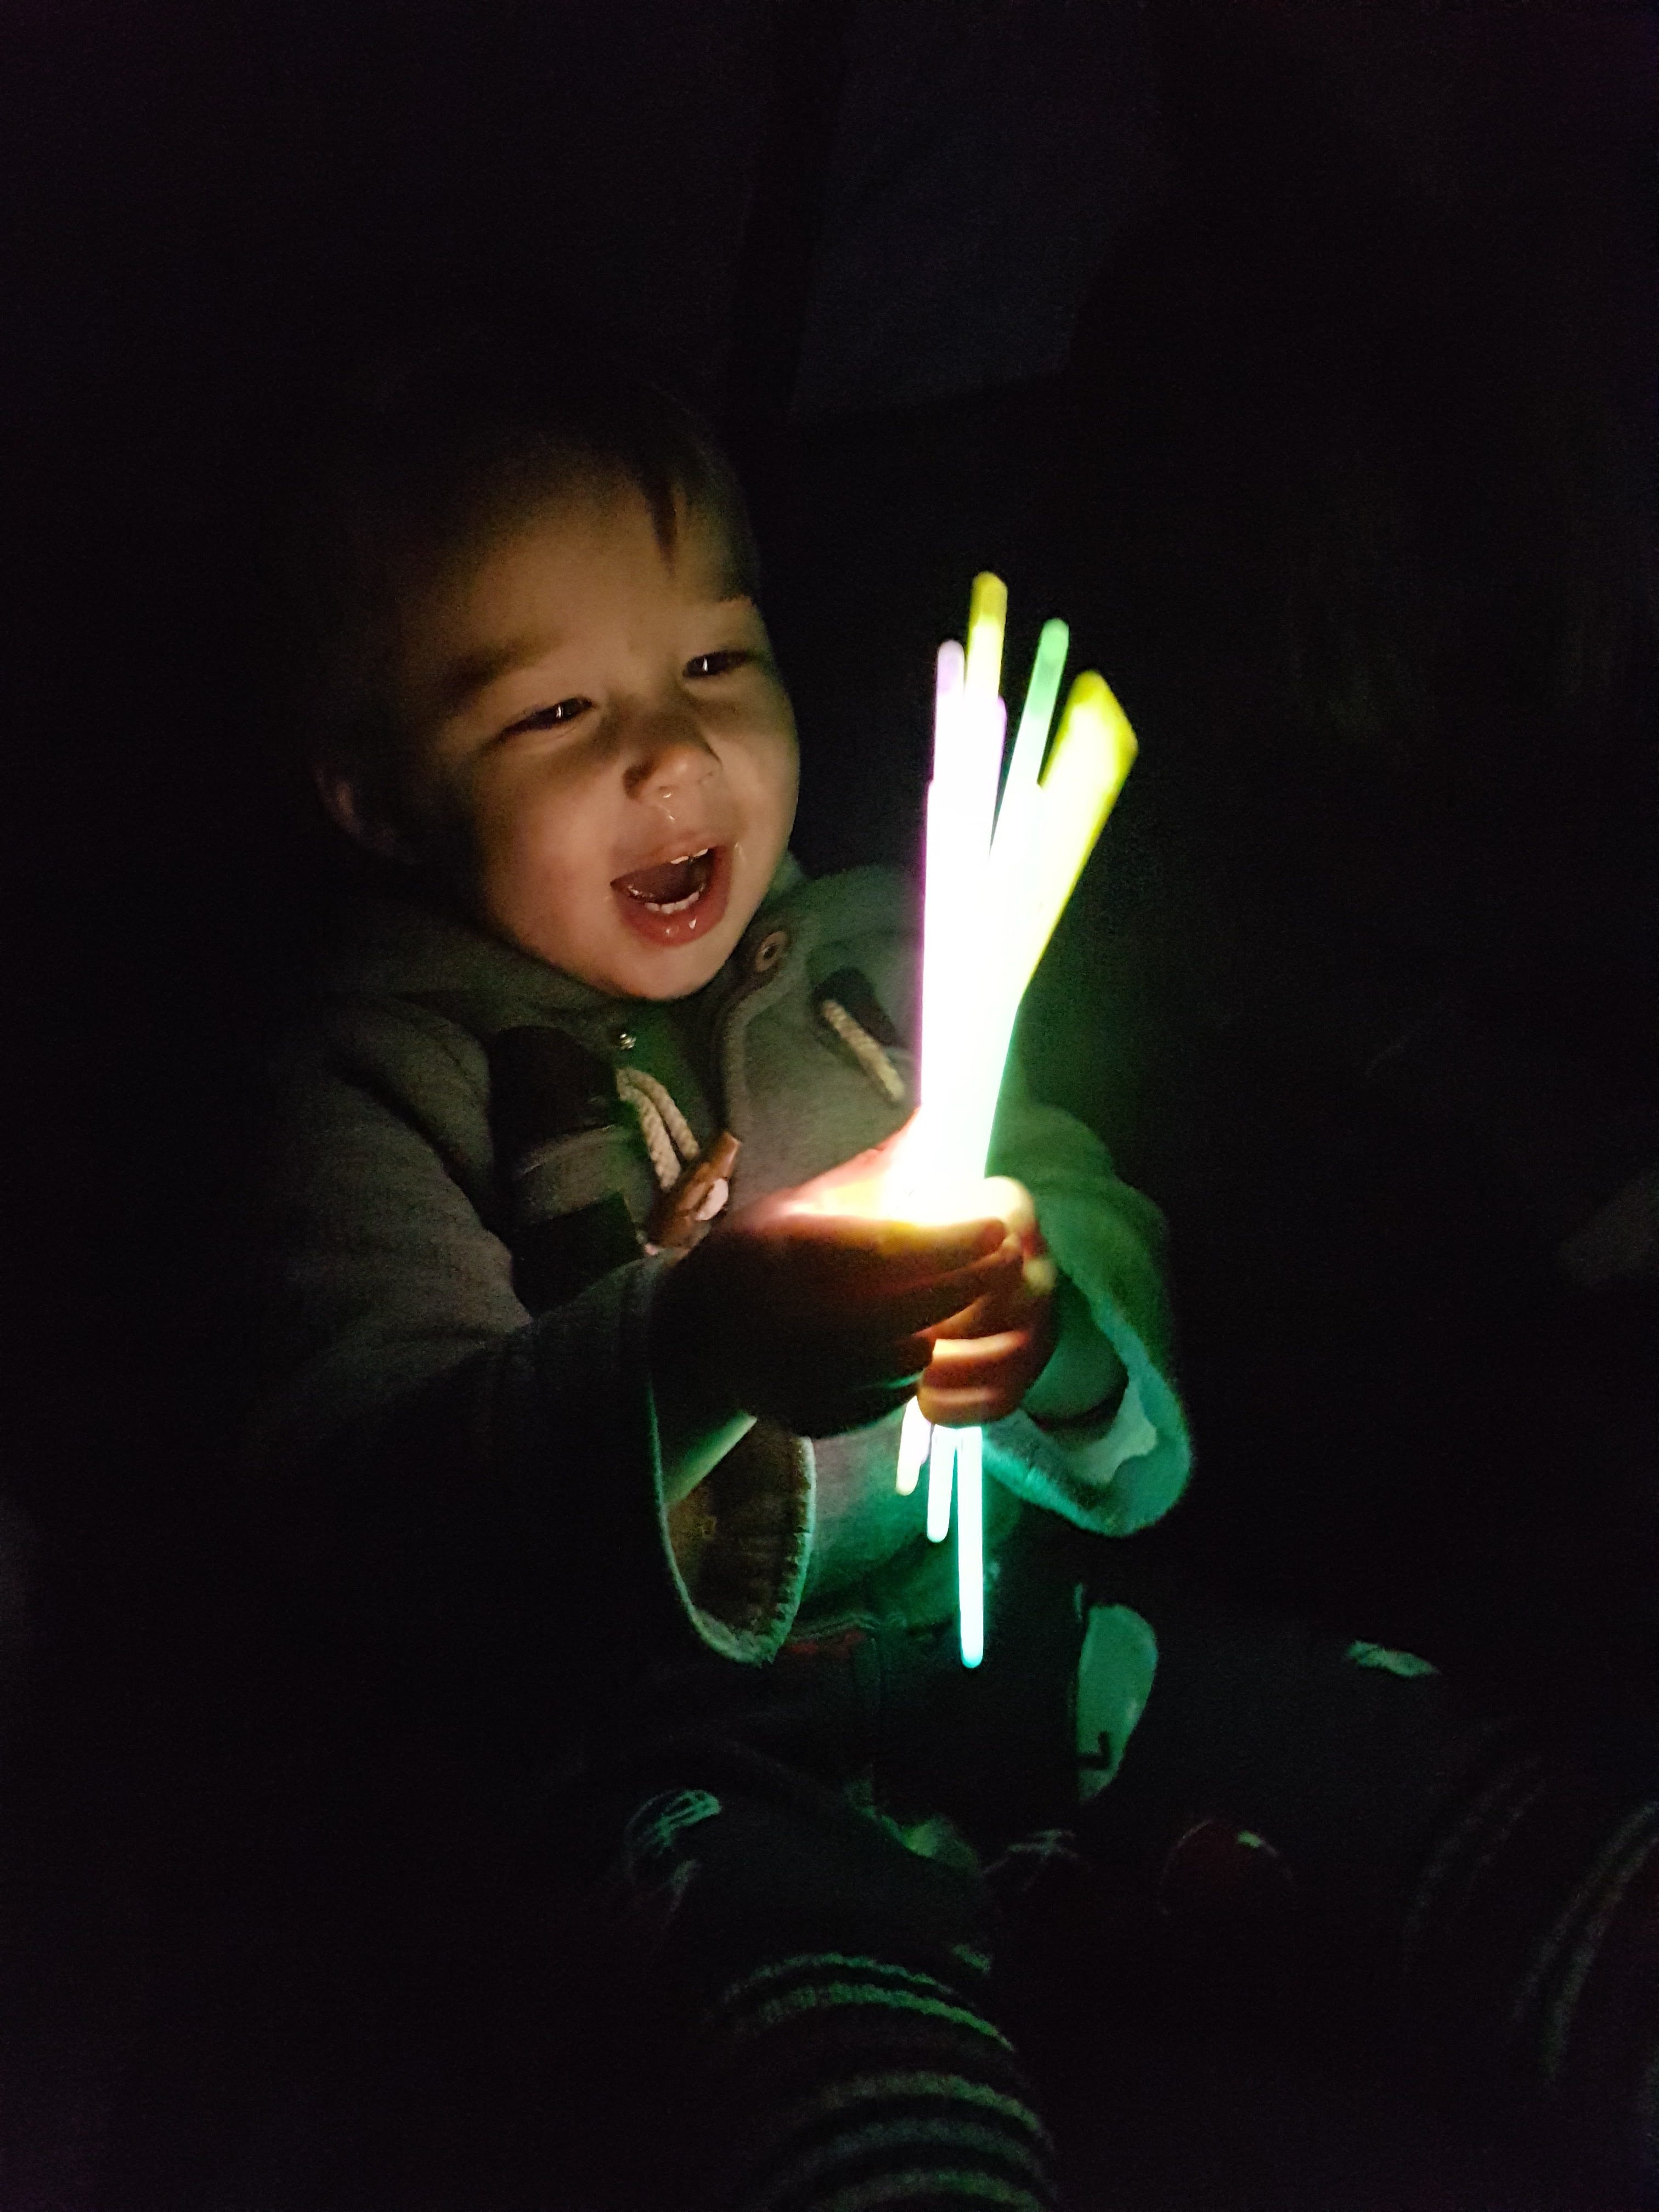 Fun Camping Activities for Toddlers #3 - Play with glow sticks in the tent before bed